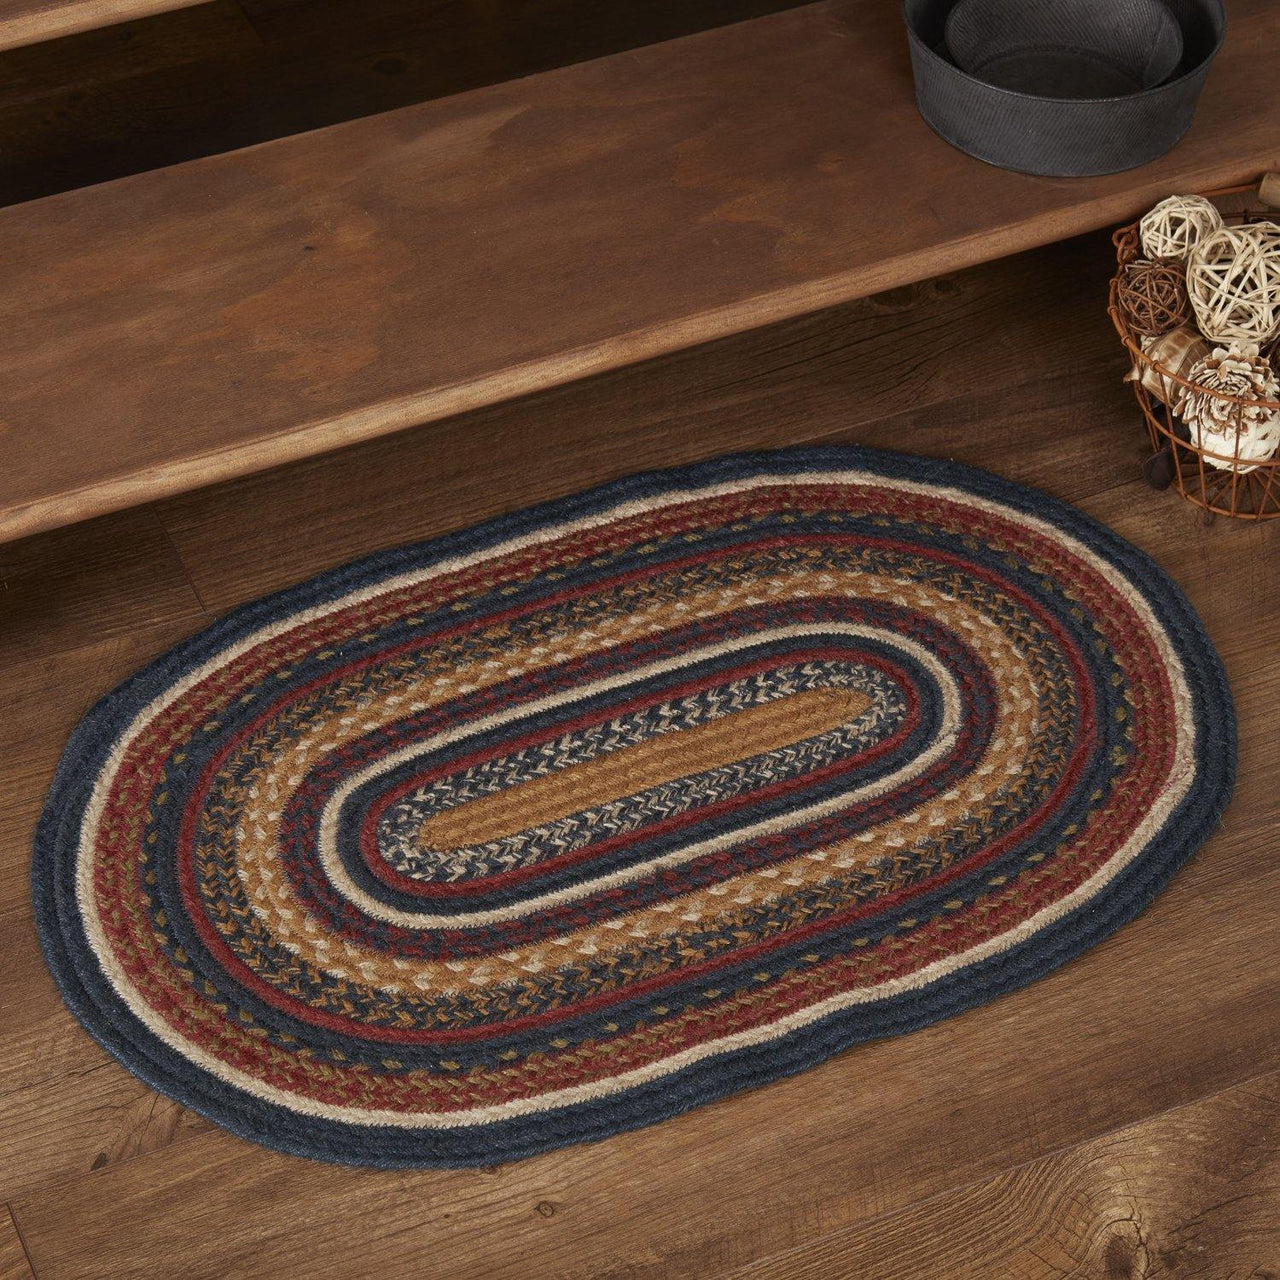 Stratton Jute Braided Rug Oval 20"x30" with Rug Pad VHC Brands - The Fox Decor